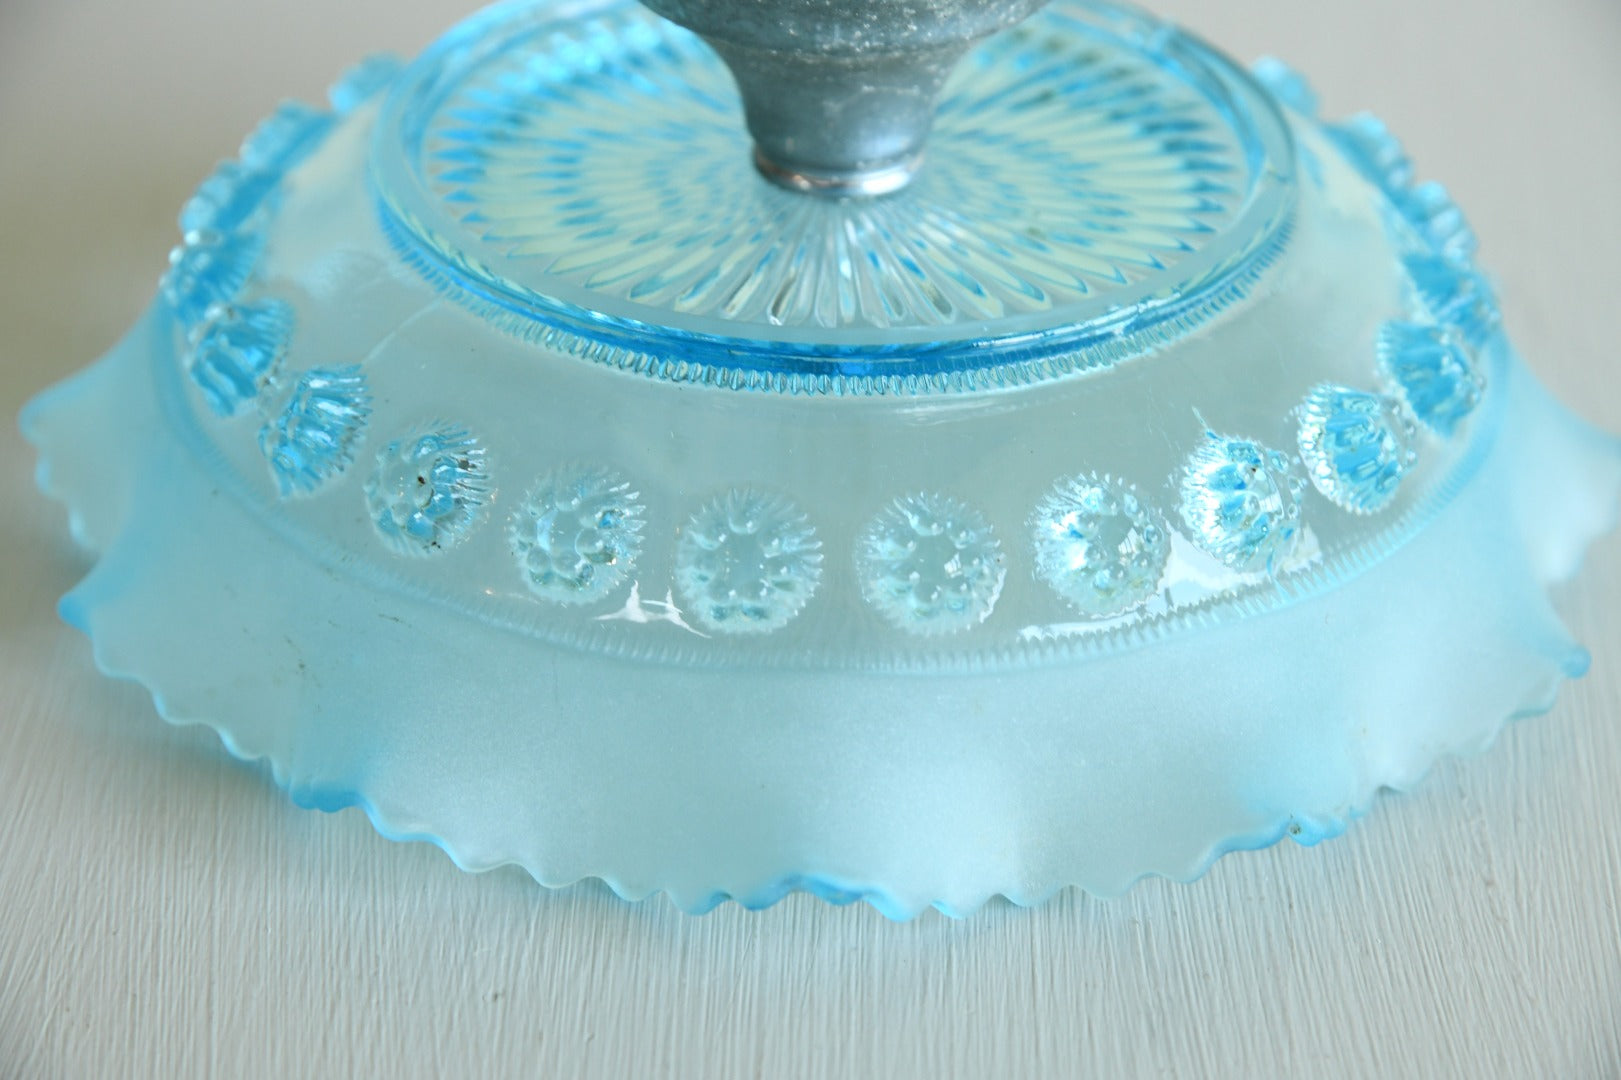 Vintage Retro Blue Glass Bowl on Stand